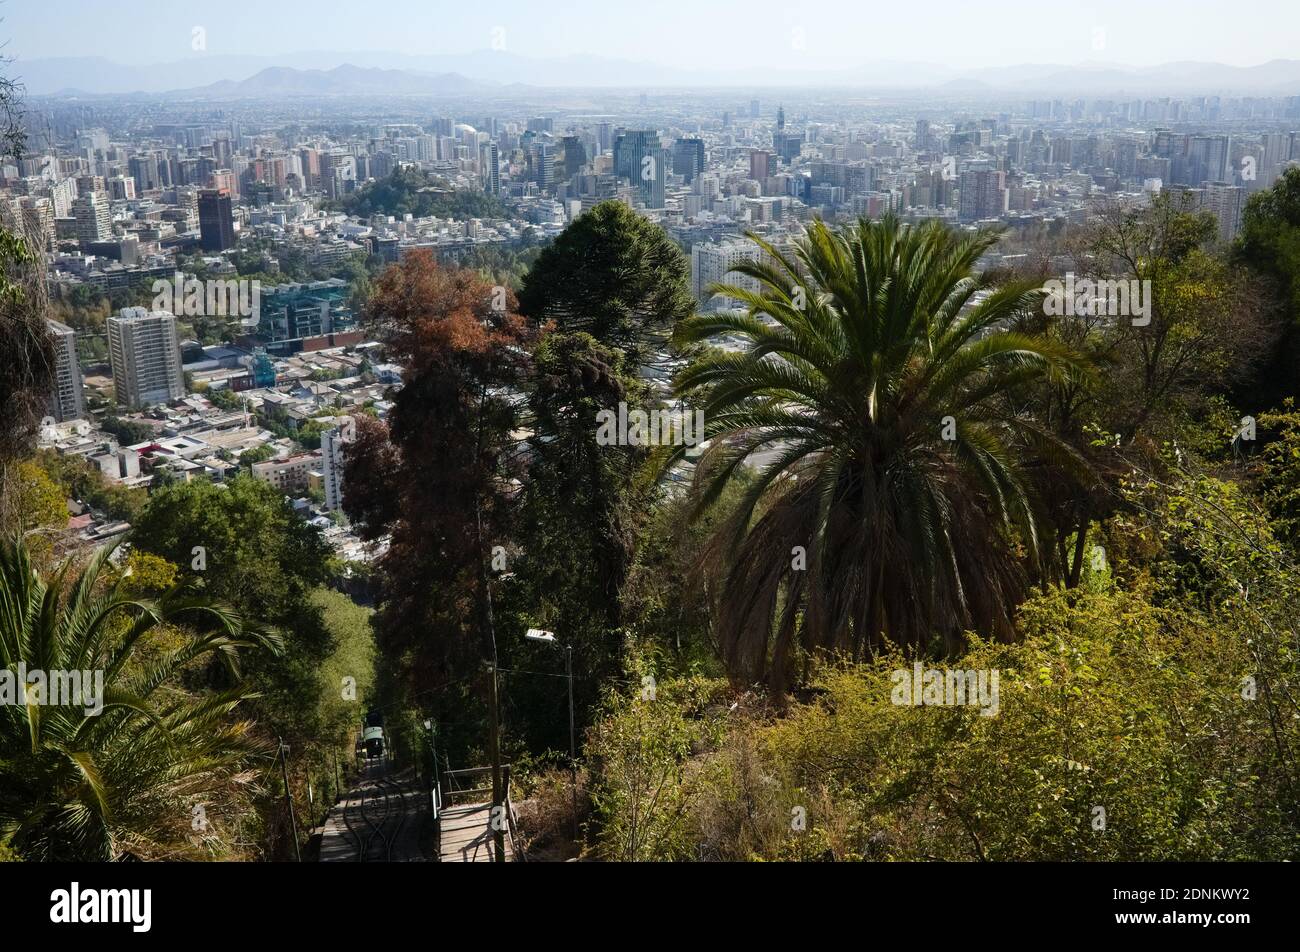 Santiago de Chile panoramic city view from San Cristobal hill with lush foliage with palm trees and funicular road. Santiago, Chile Stock Photo